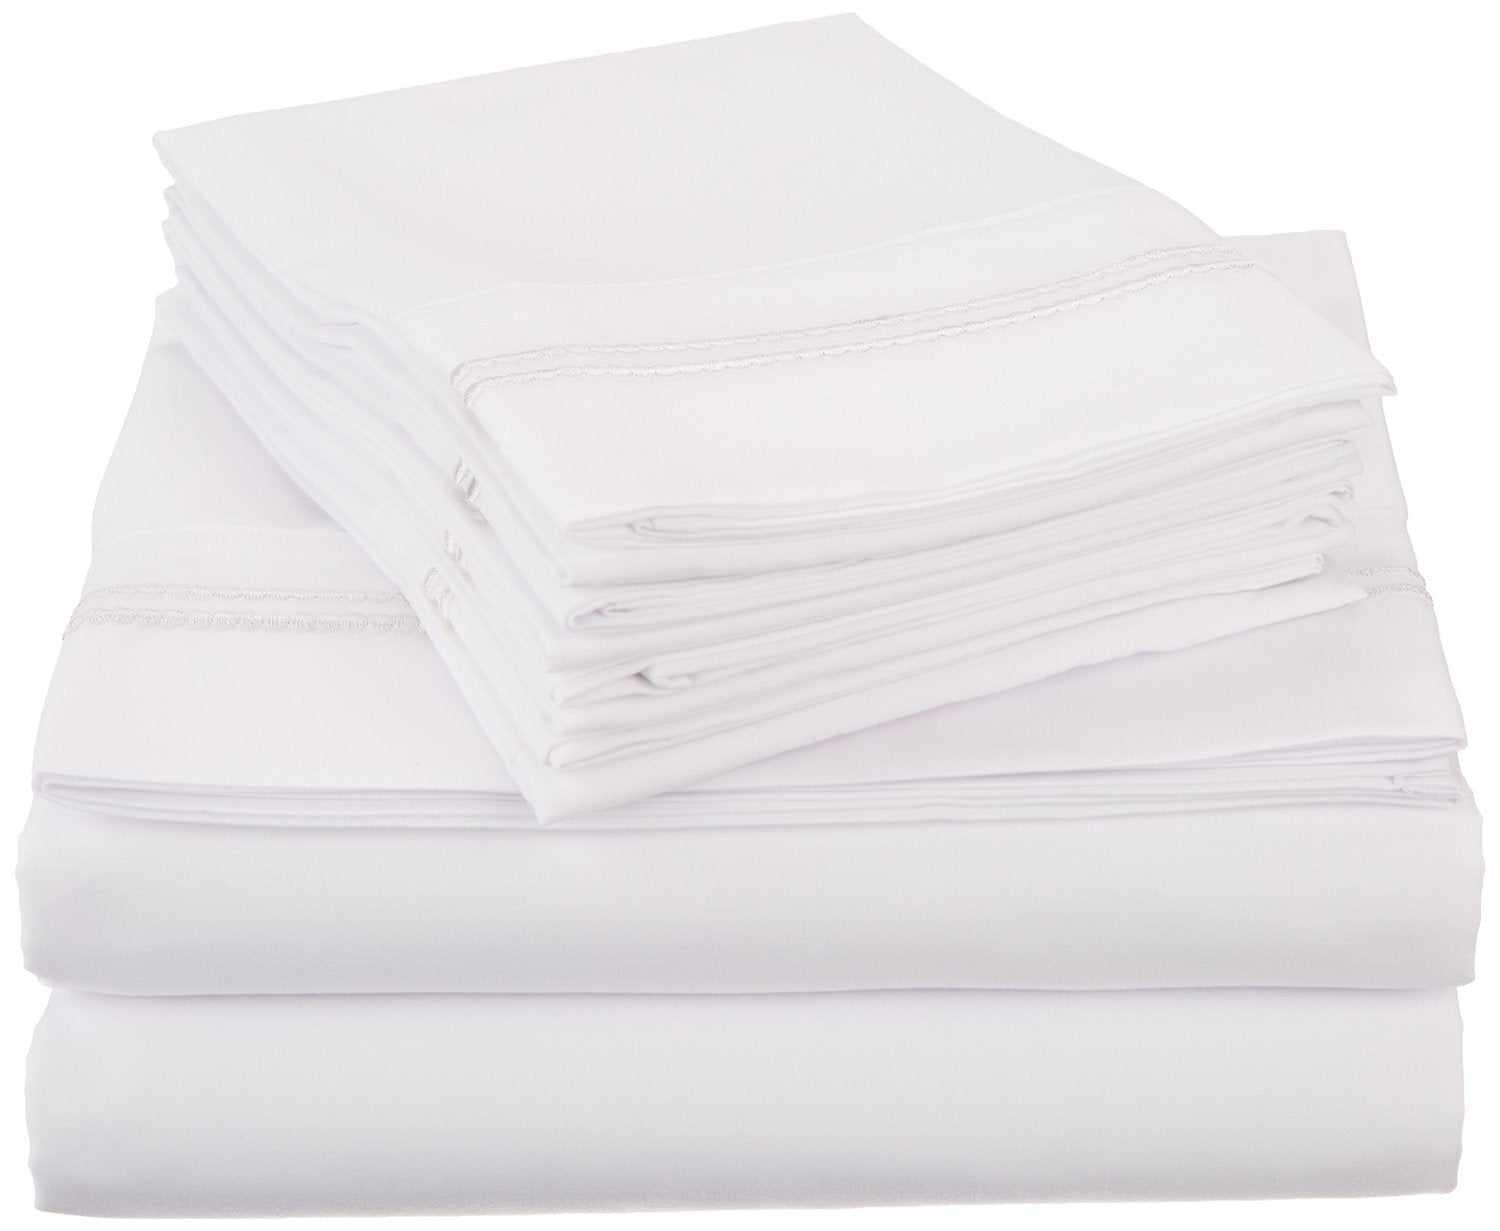 Superior Solid 2-Line Embroidered Trim Wrinkle-Free Microfiber 6 Piece Sheet Set with Extra Pillowcases - White